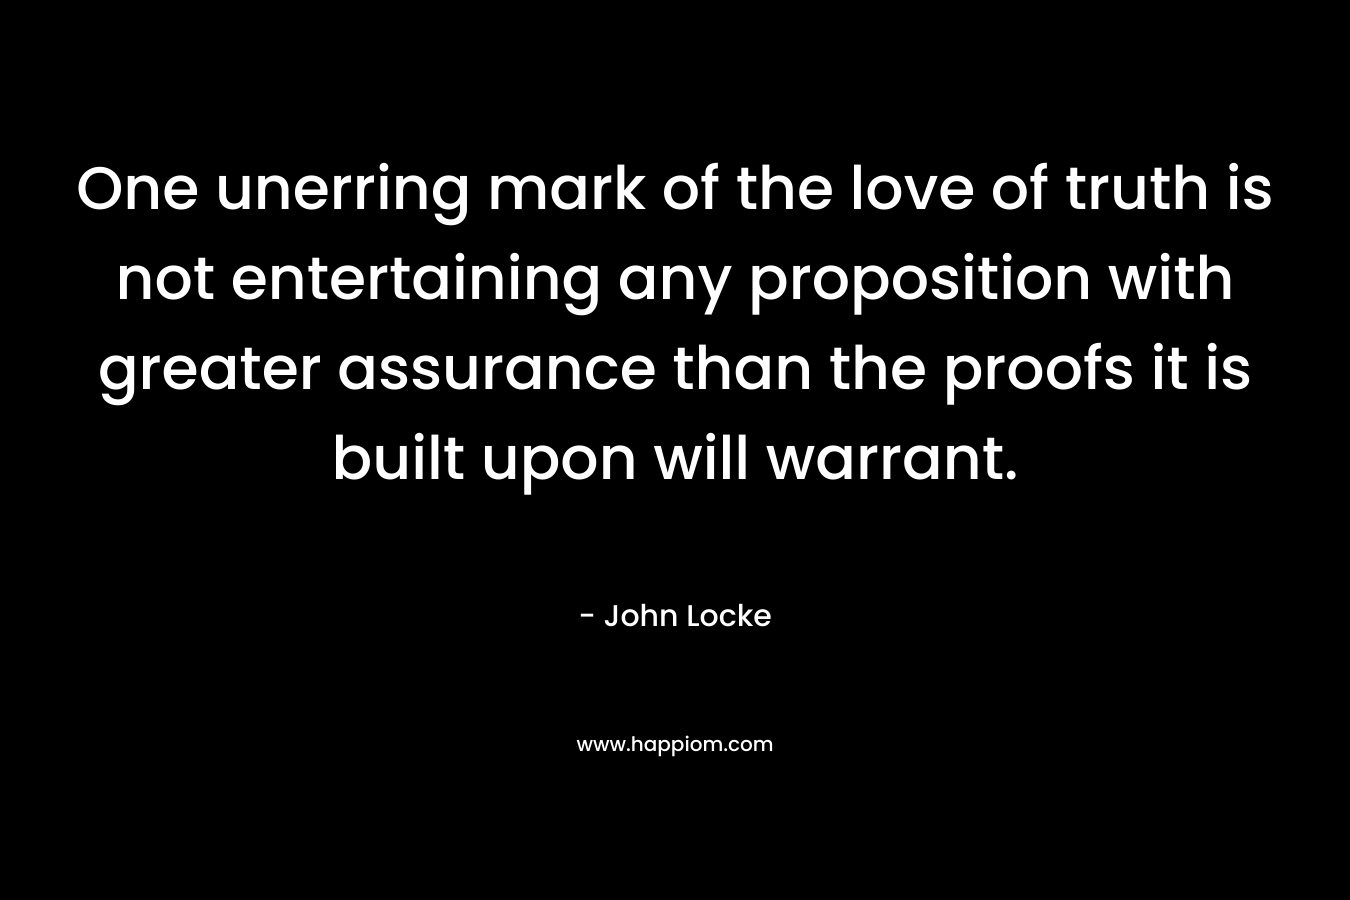 One unerring mark of the love of truth is not entertaining any proposition with greater assurance than the proofs it is built upon will warrant. – John Locke